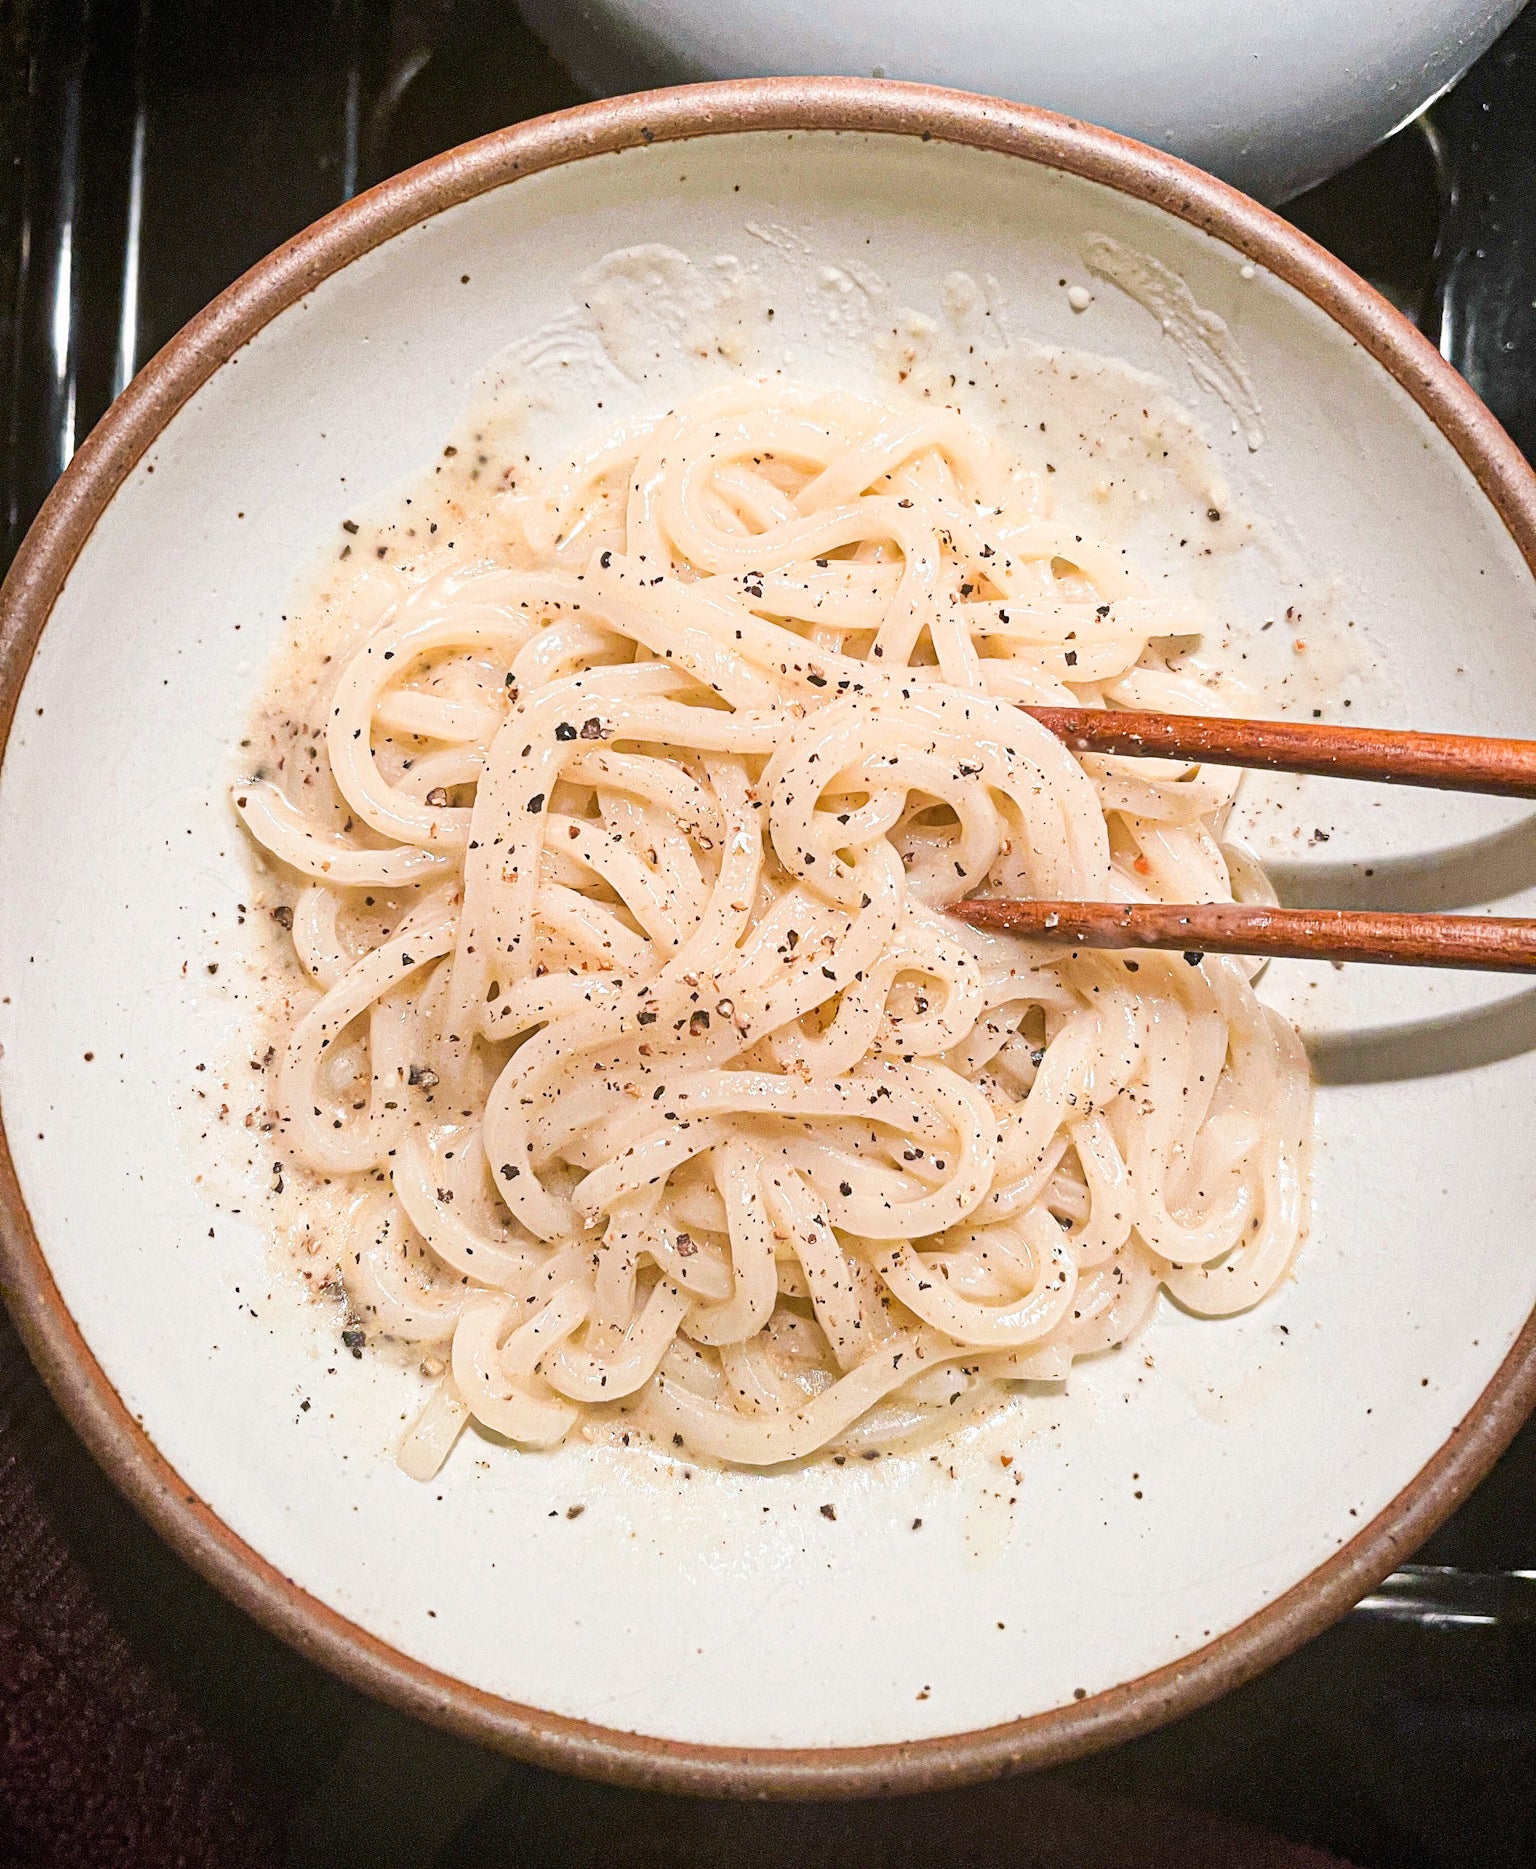 Udon noodles in a white bowl